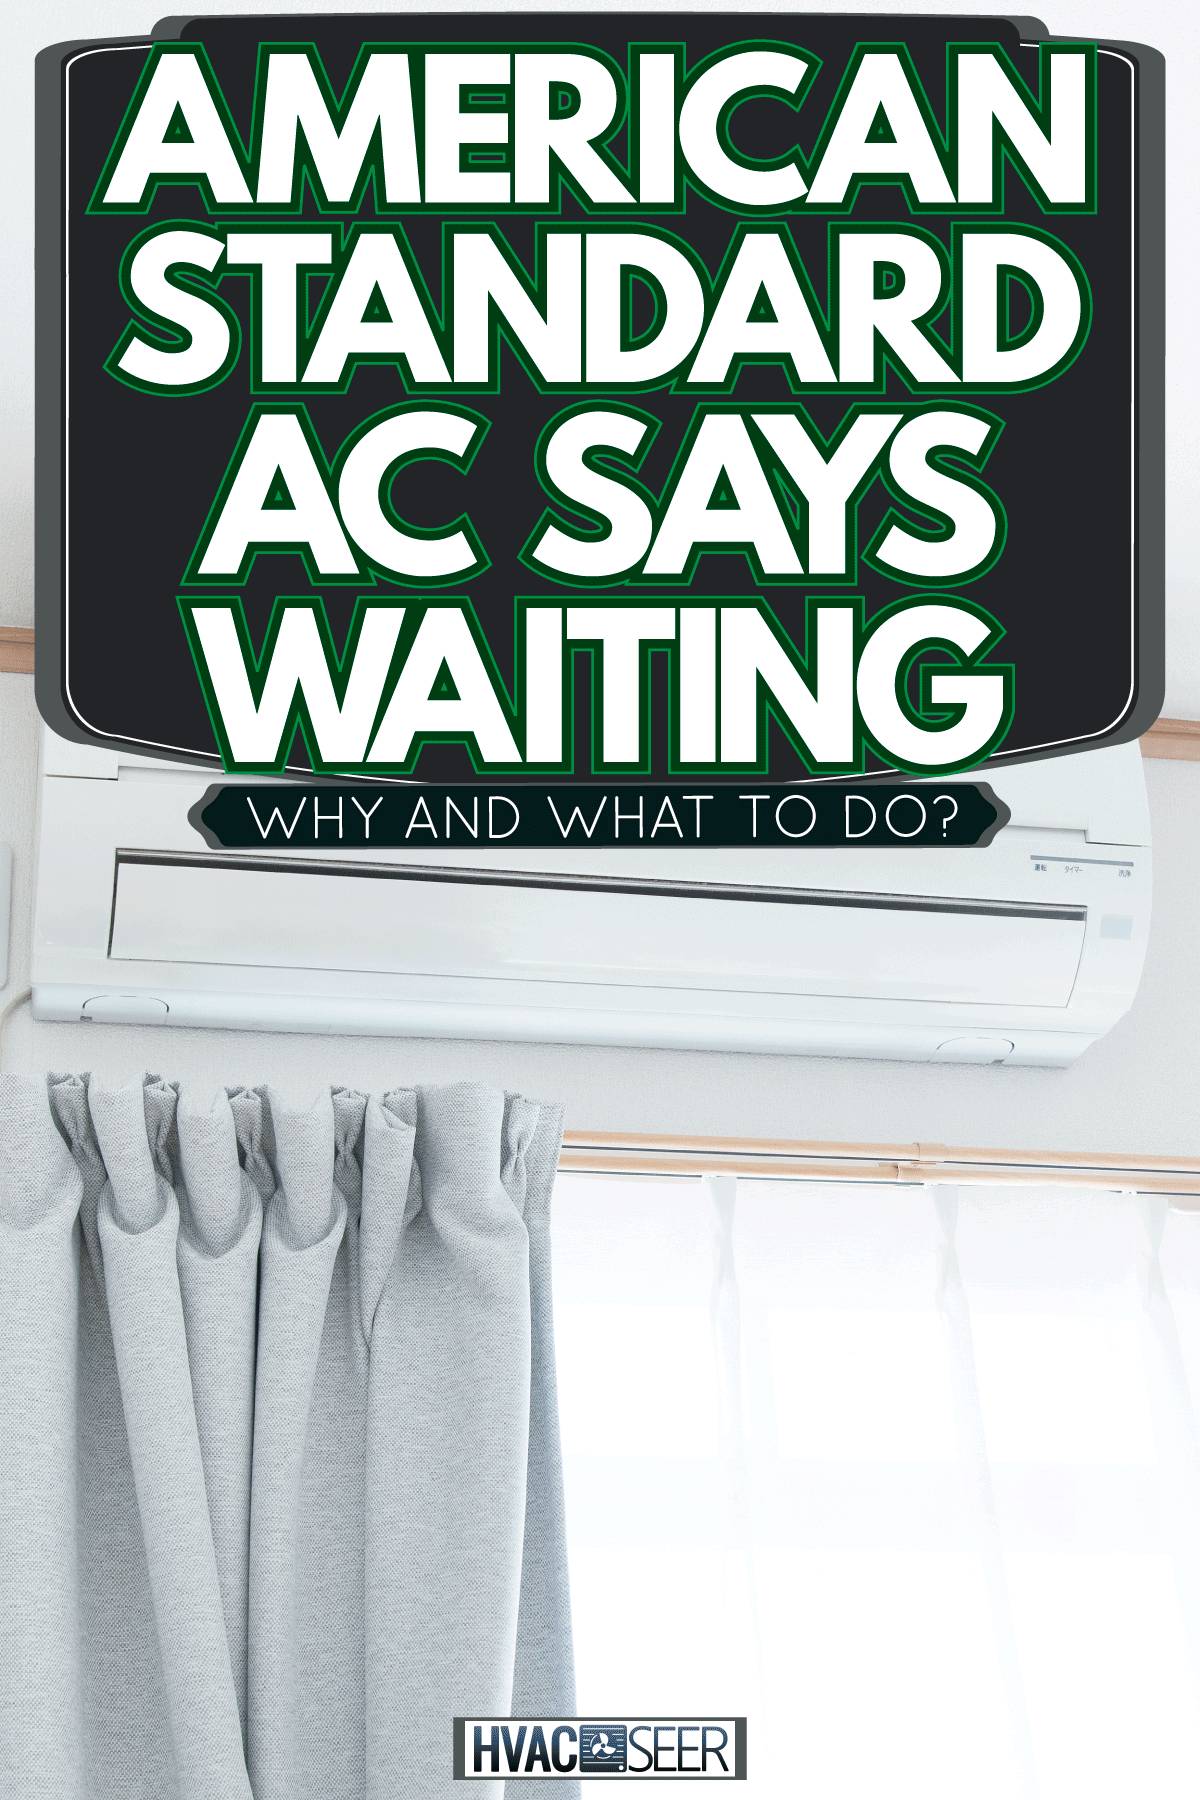 A white colored mini split ac system mounted on a wall, American Standard AC Says Waiting - Why And What To Do?